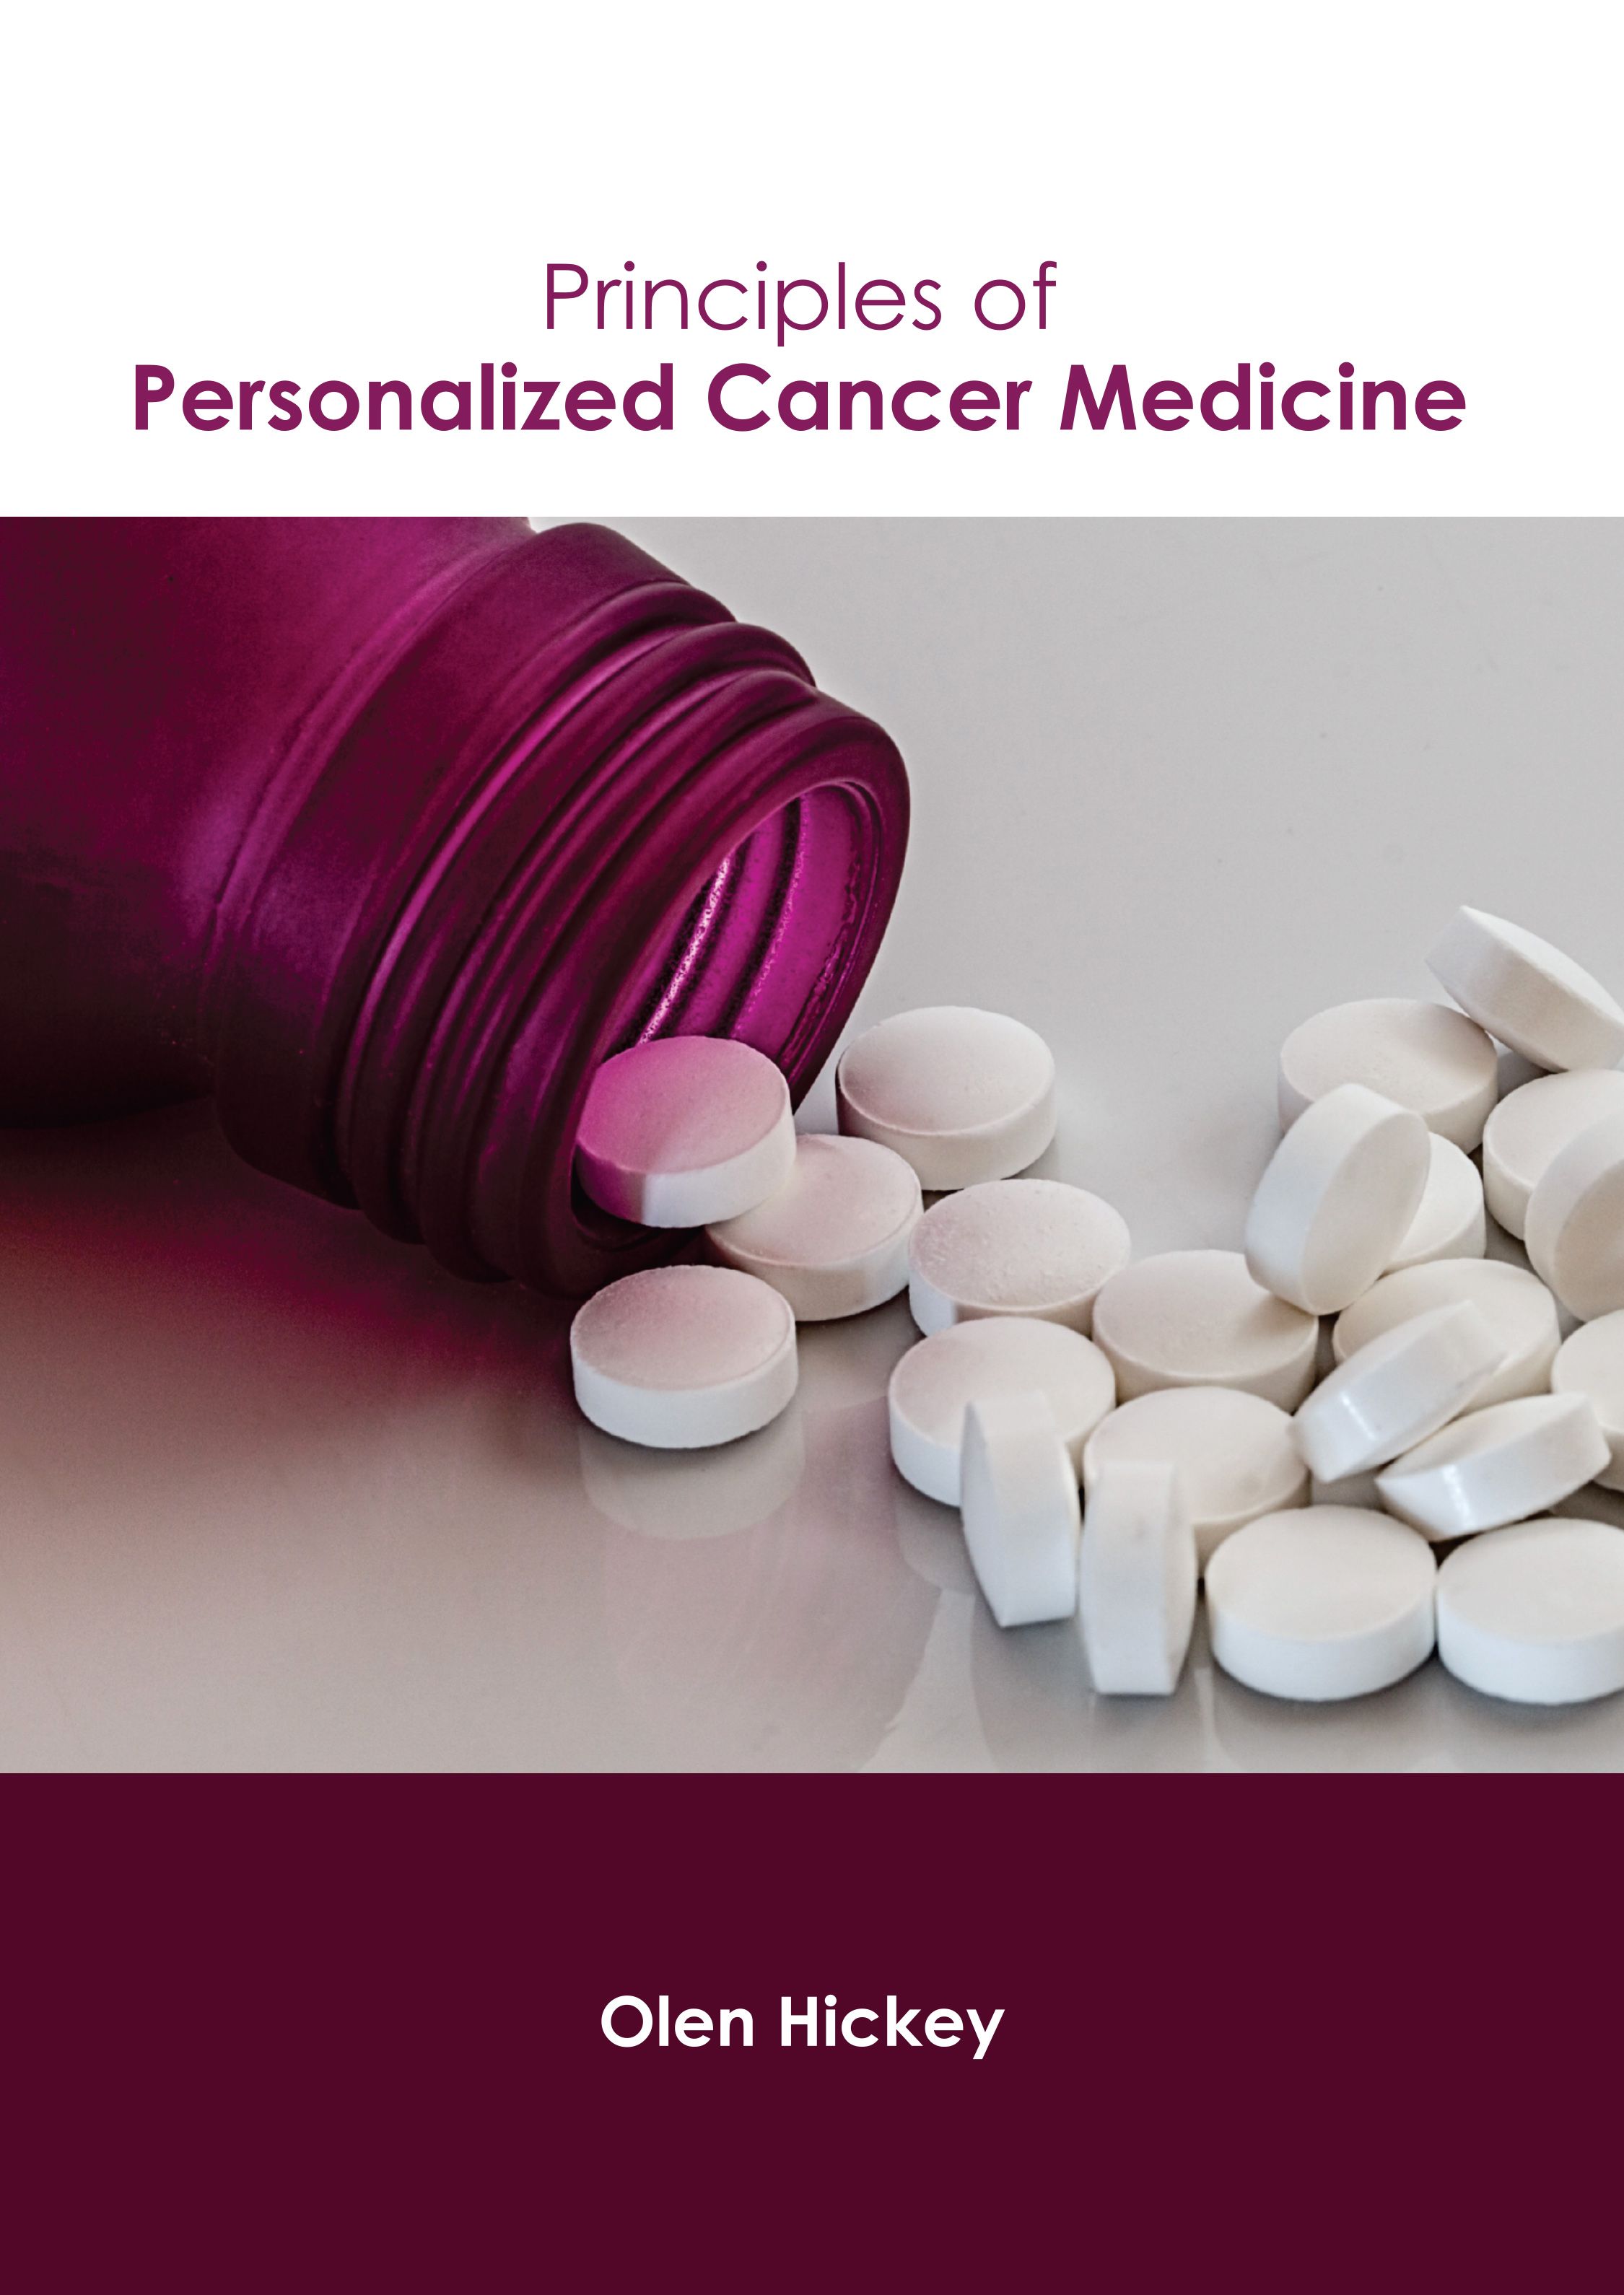 PRINCIPLES OF PERSONALIZED CANCER MEDICINE